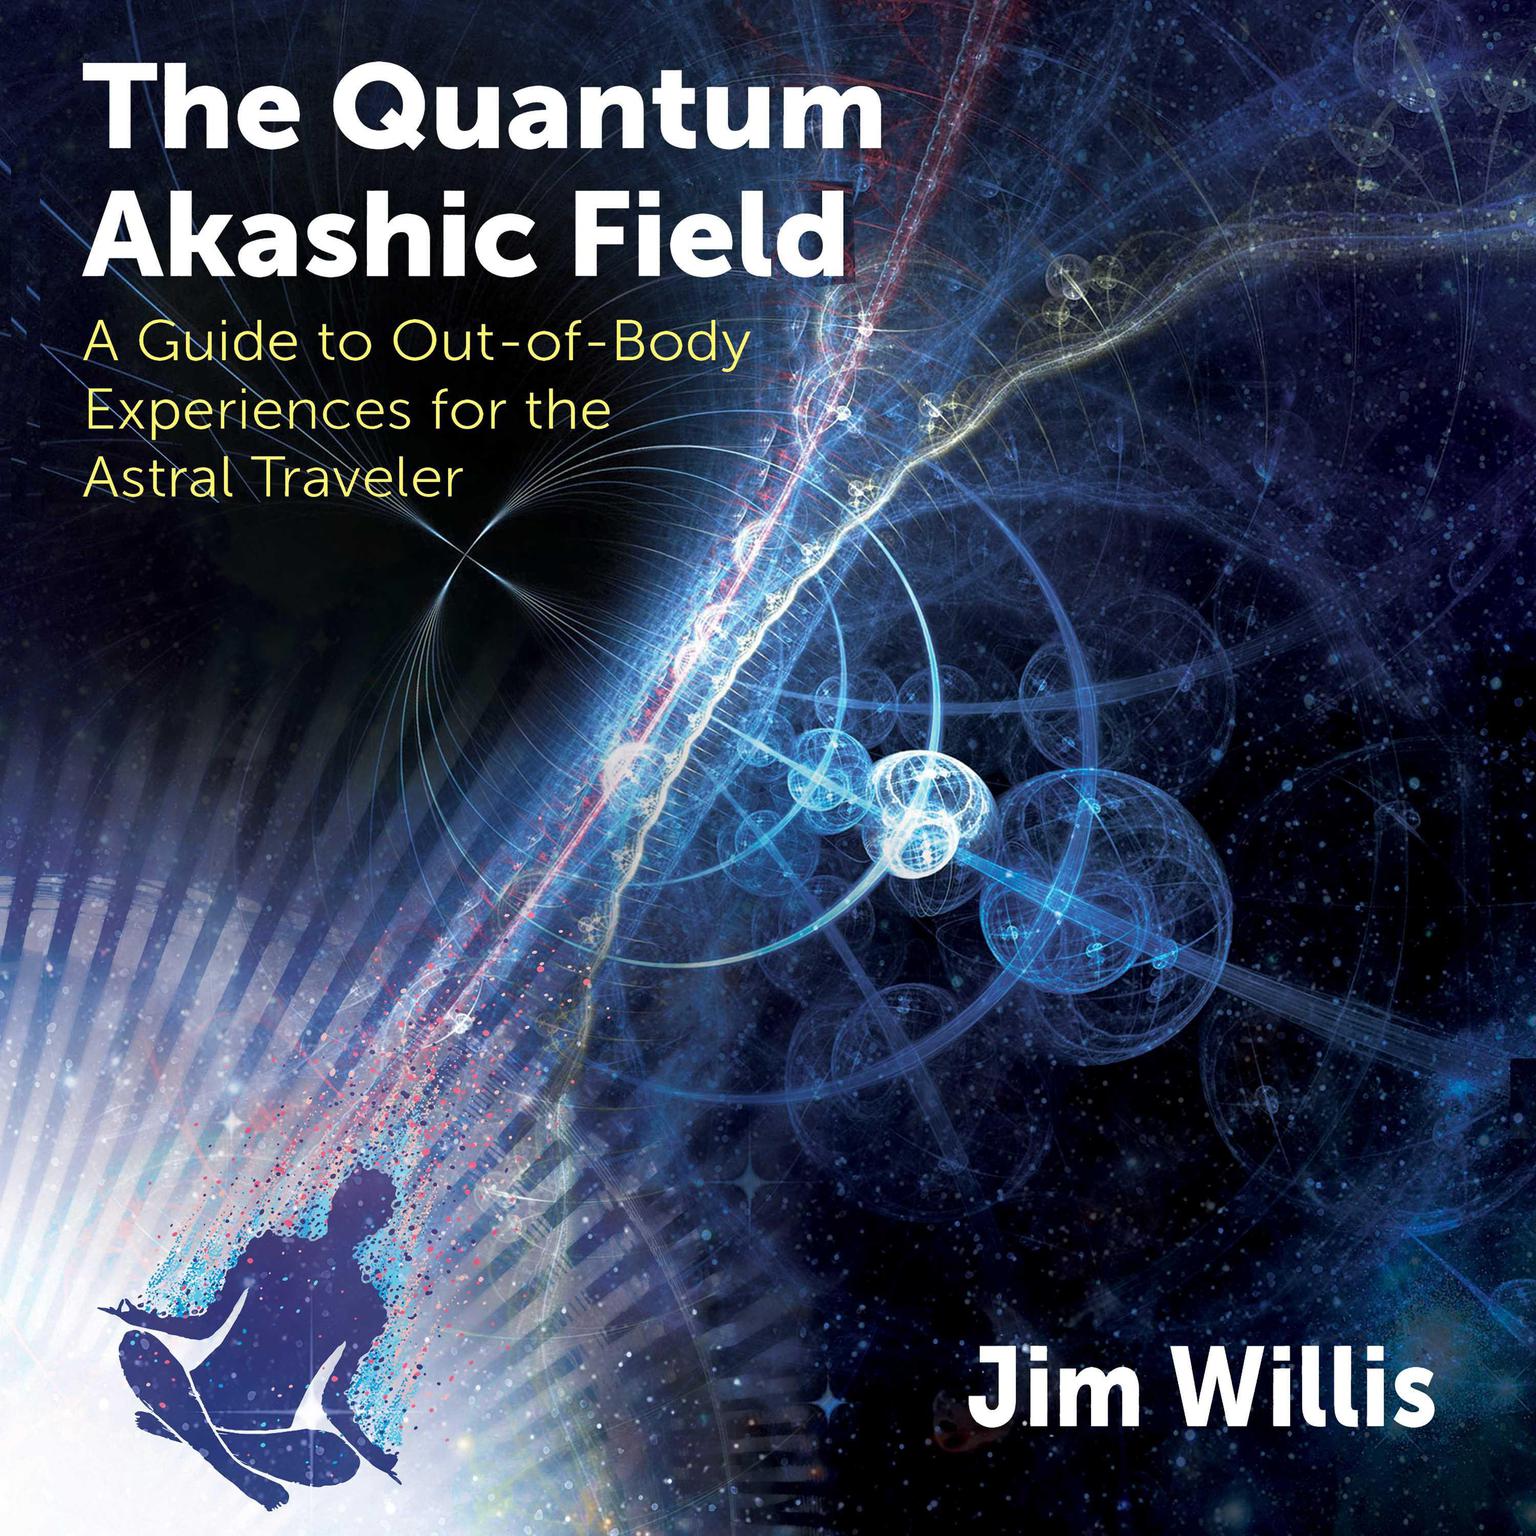 The Quantum Akashic Field: A Guide to Out-of-Body Experiences for the Astral Traveler Audiobook, by Jim Willis